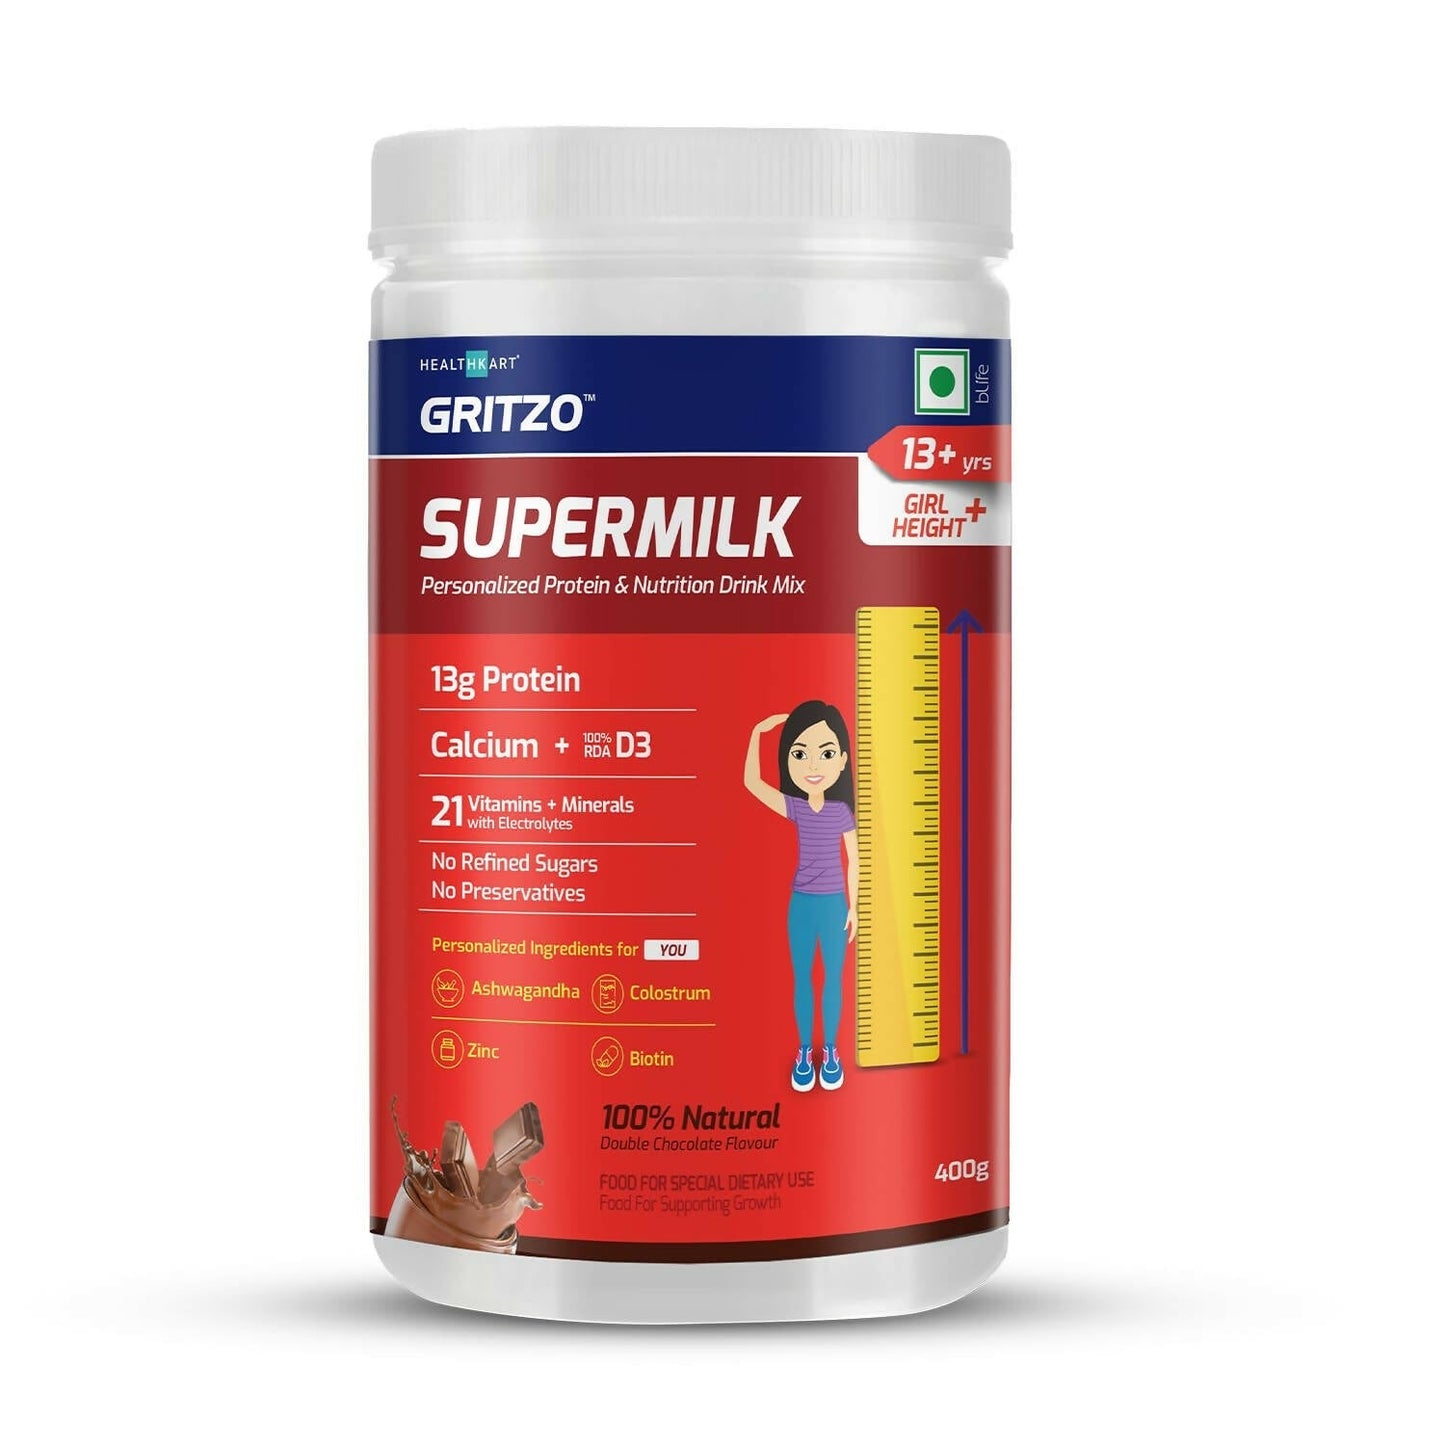 Gritzo Supermilk Height+ Health Drink For 13+Y Girls - Double Chocolate